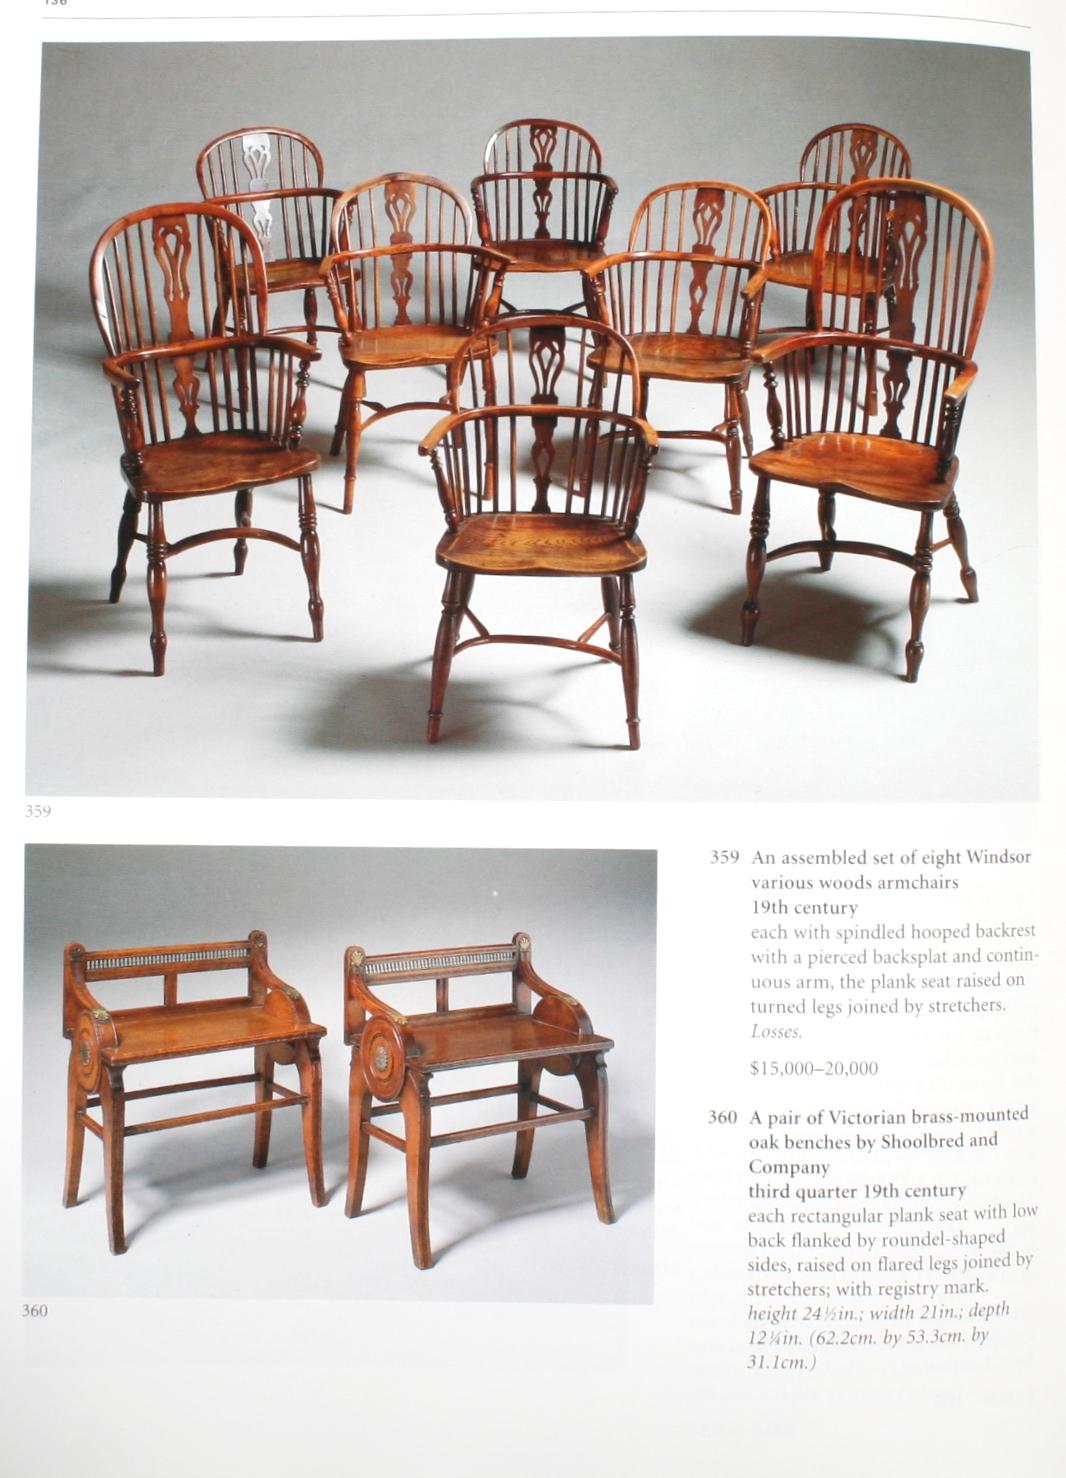 American Sotheby's: English Furniture & Decorations, John L. Boonshaft Collection, 1998 For Sale